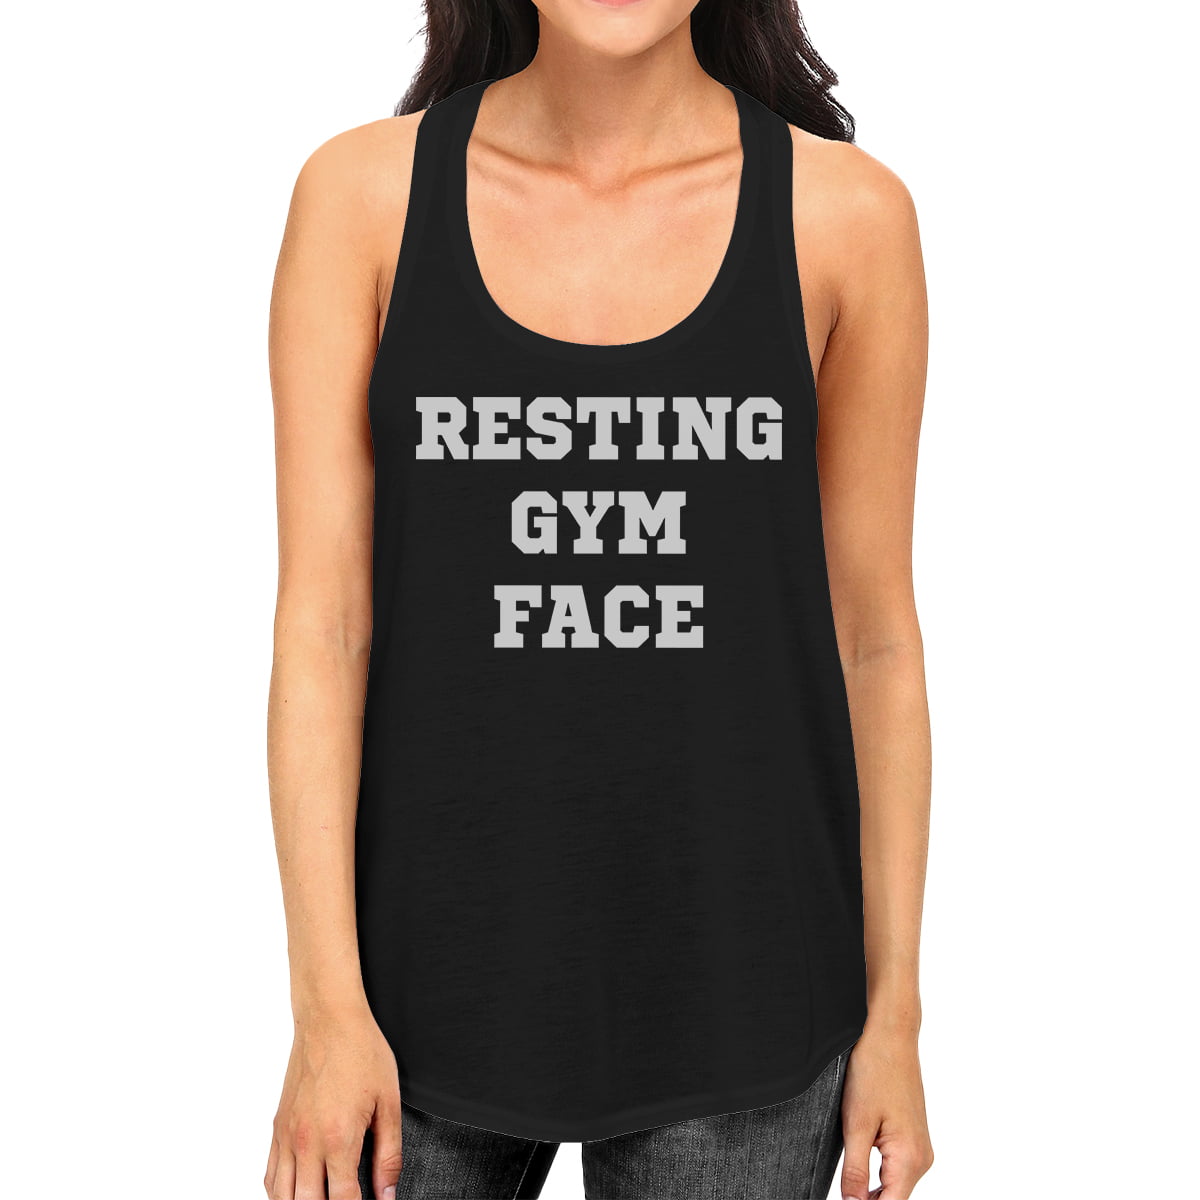 Eat Sleep Sweat Repeat Tank Exercise Top Ladies\u2019 Muscle Tank Funny Workout Shirts Workout Tank for Women